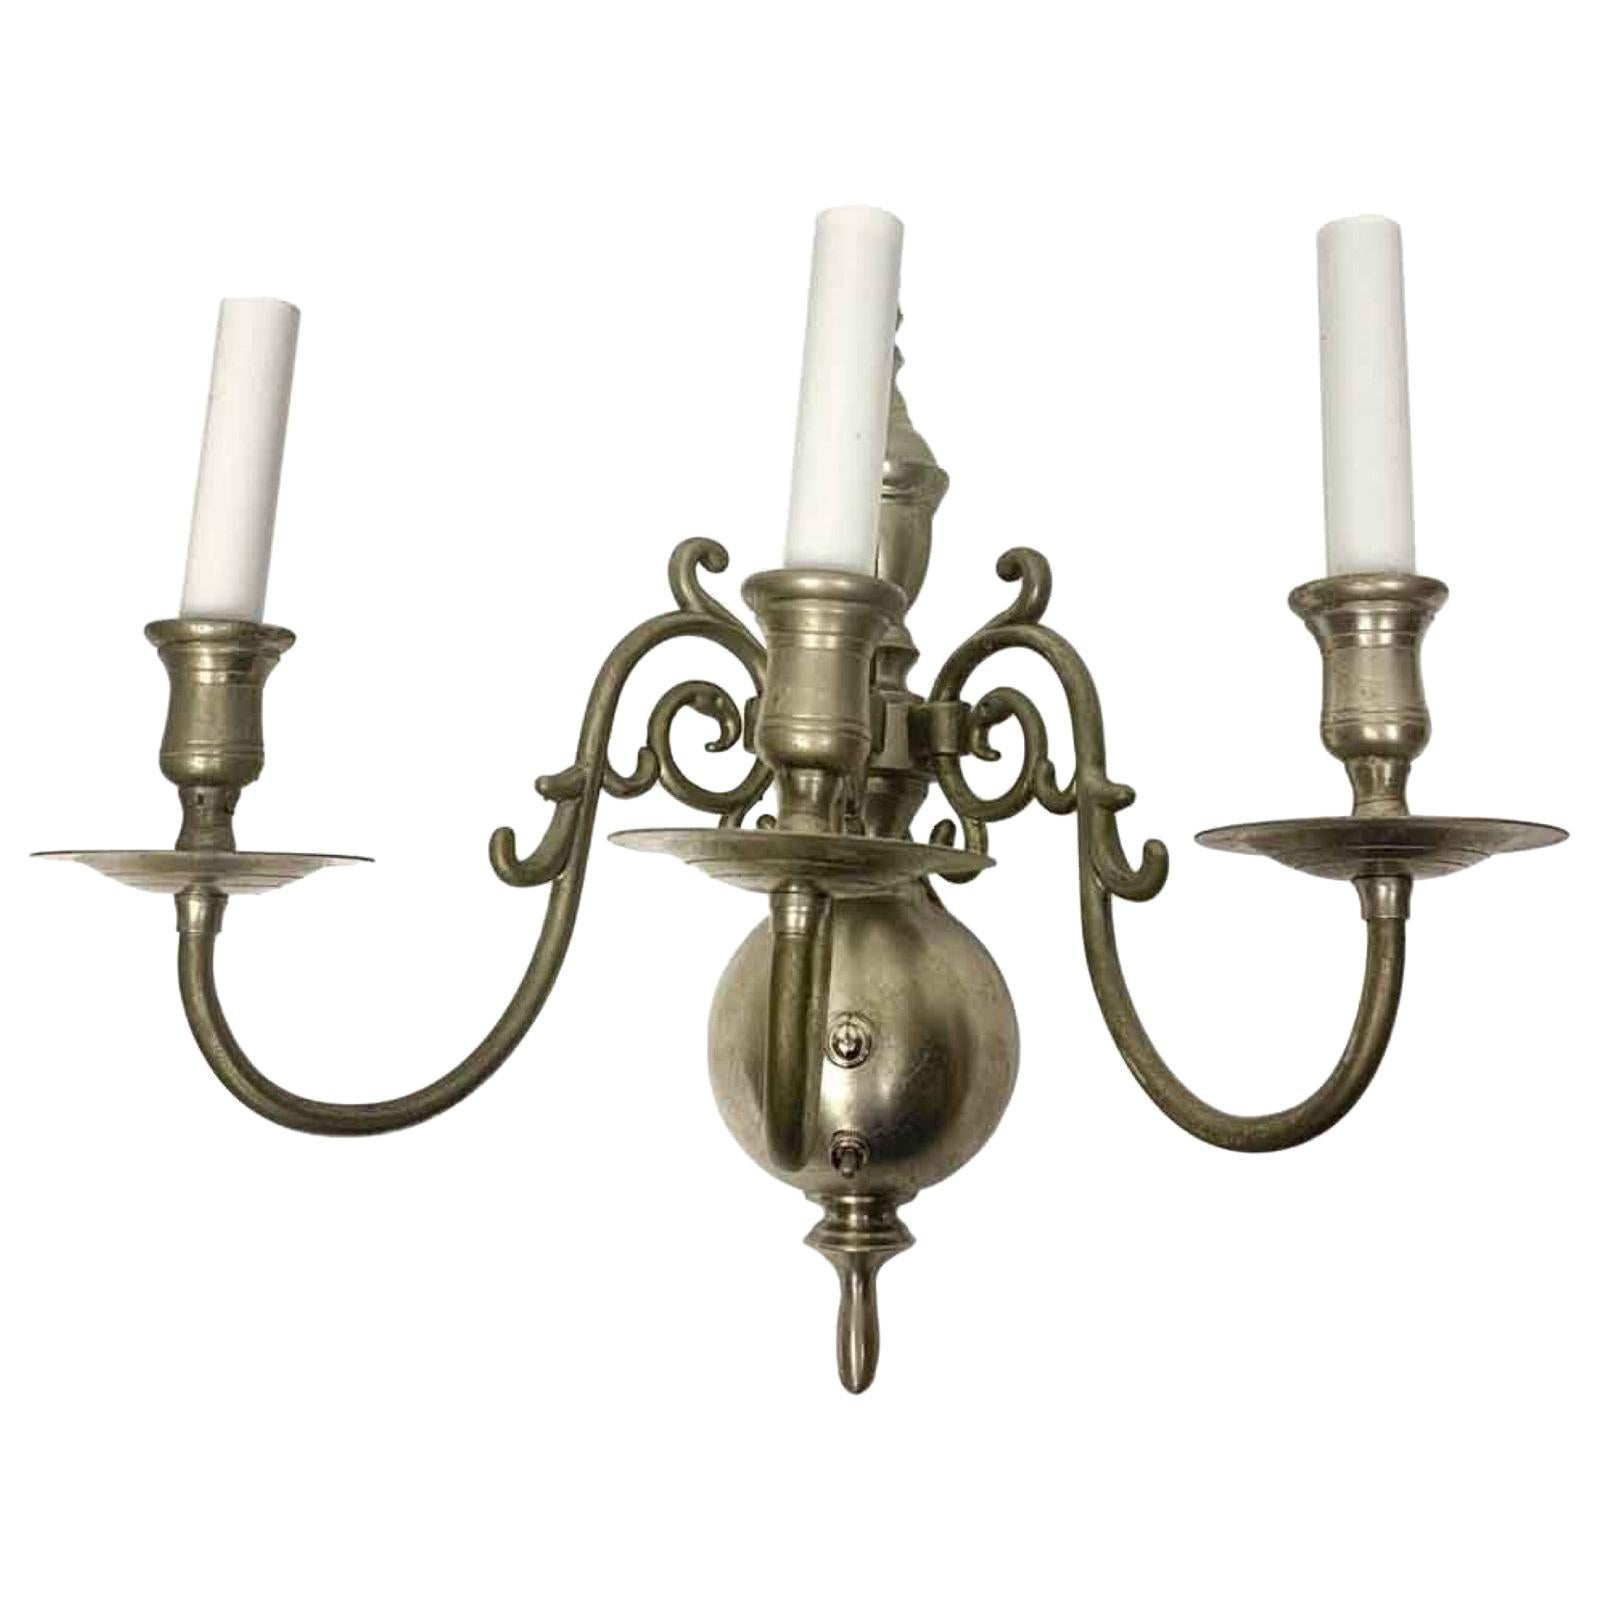 Original Silver Over Brass Williamsburg Wall Sconce, Quantity Available For Sale